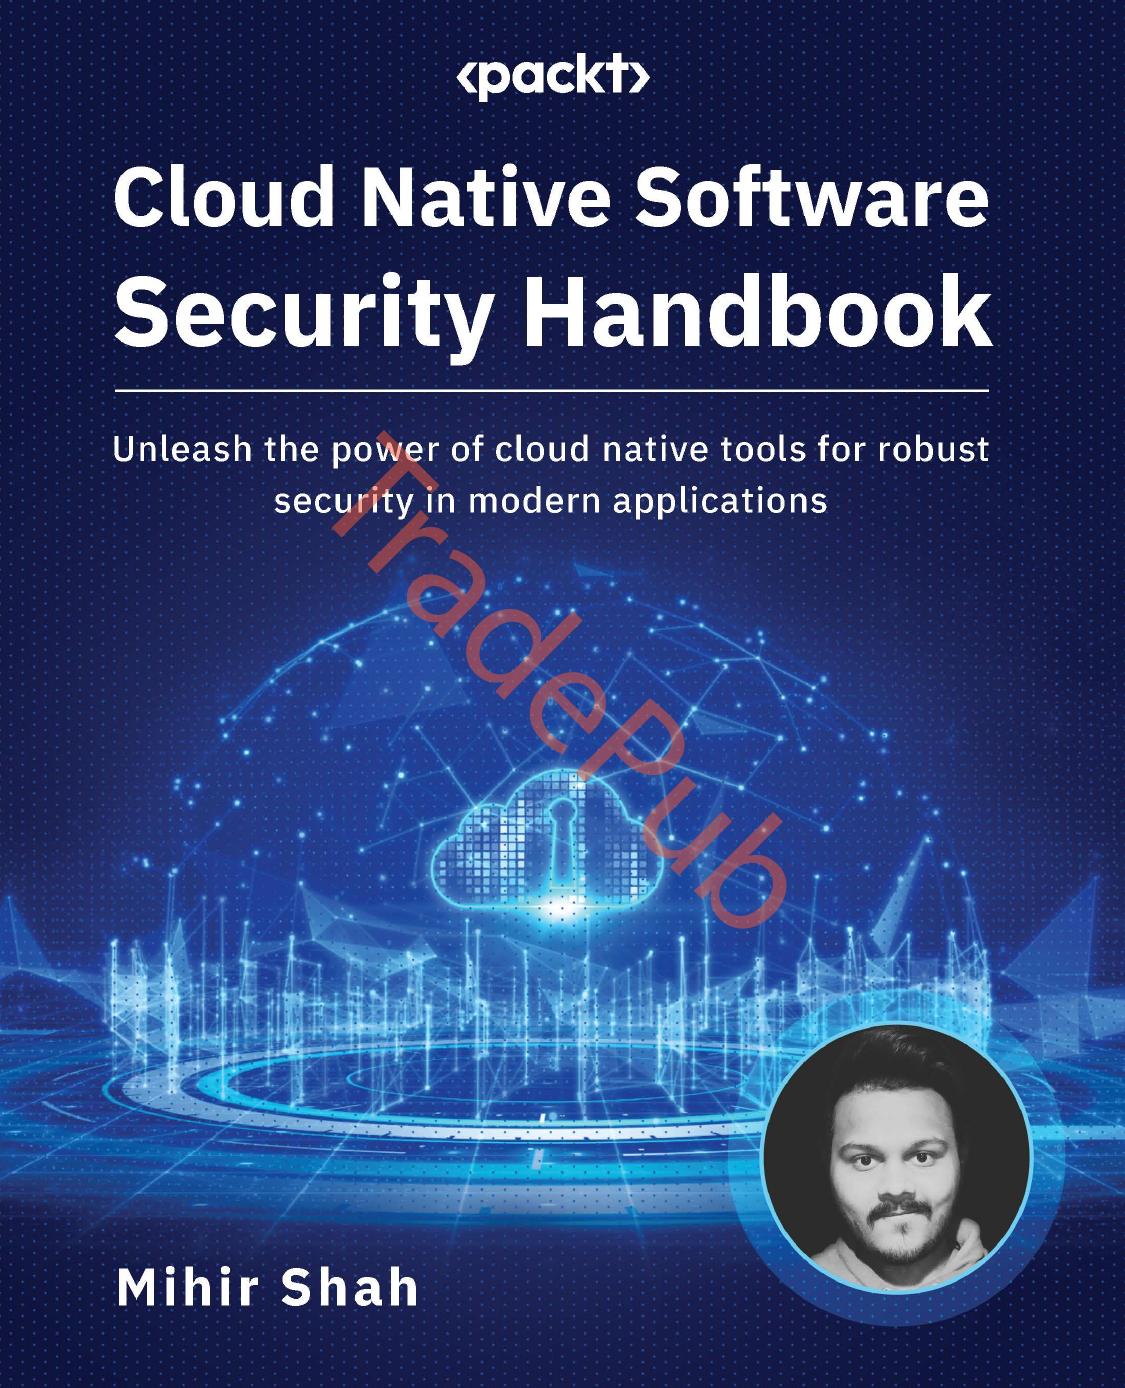 Cloud Native Software Security Handbook: Unleash the Power of Cloud Native Tools for Robust Security in Modern Applications